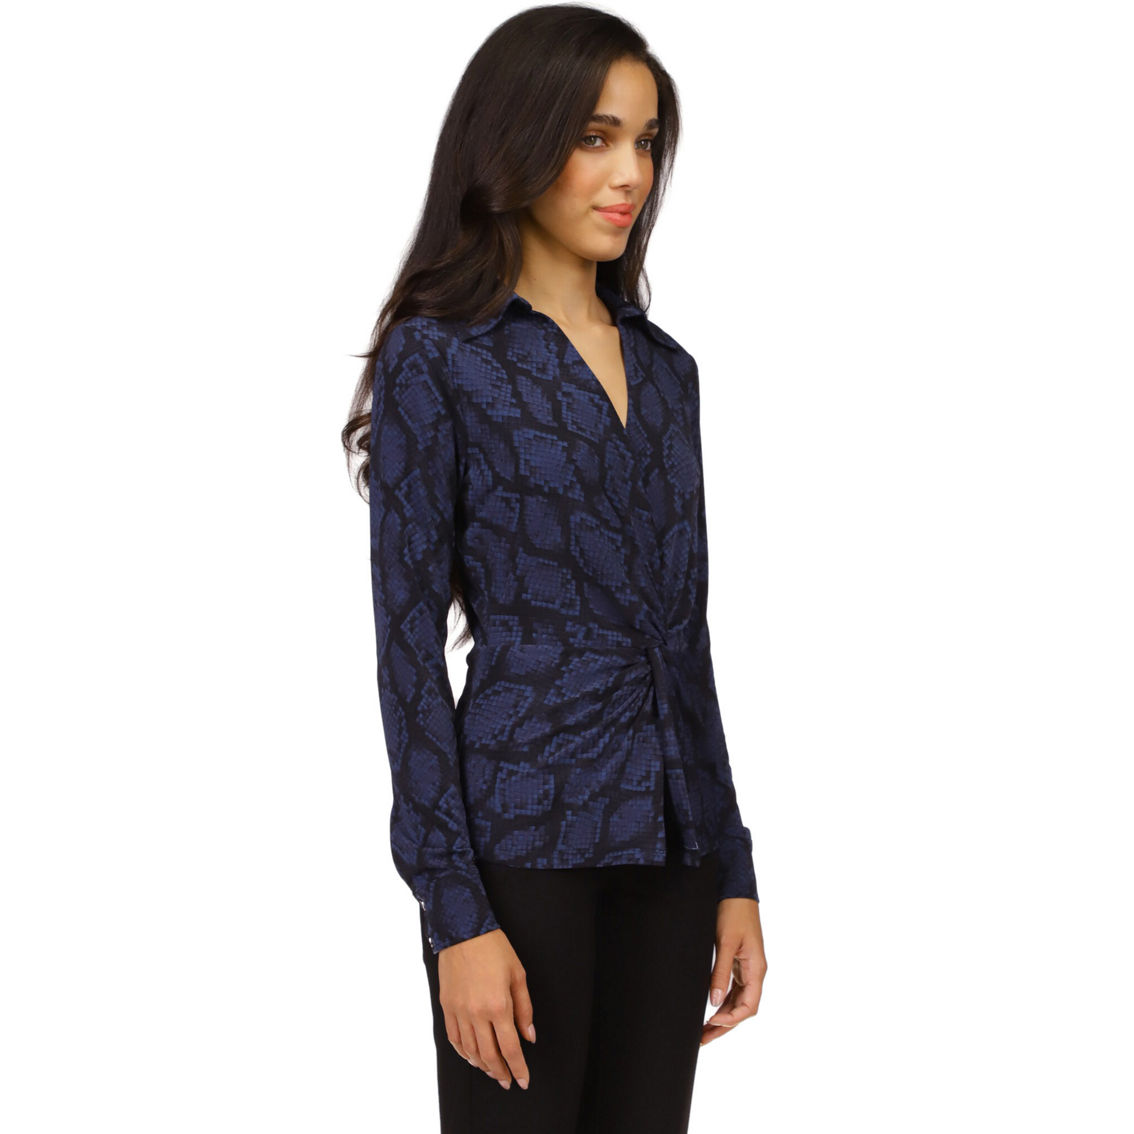 Michael Kors Snake Twist Front Collared Shirt - Image 3 of 4